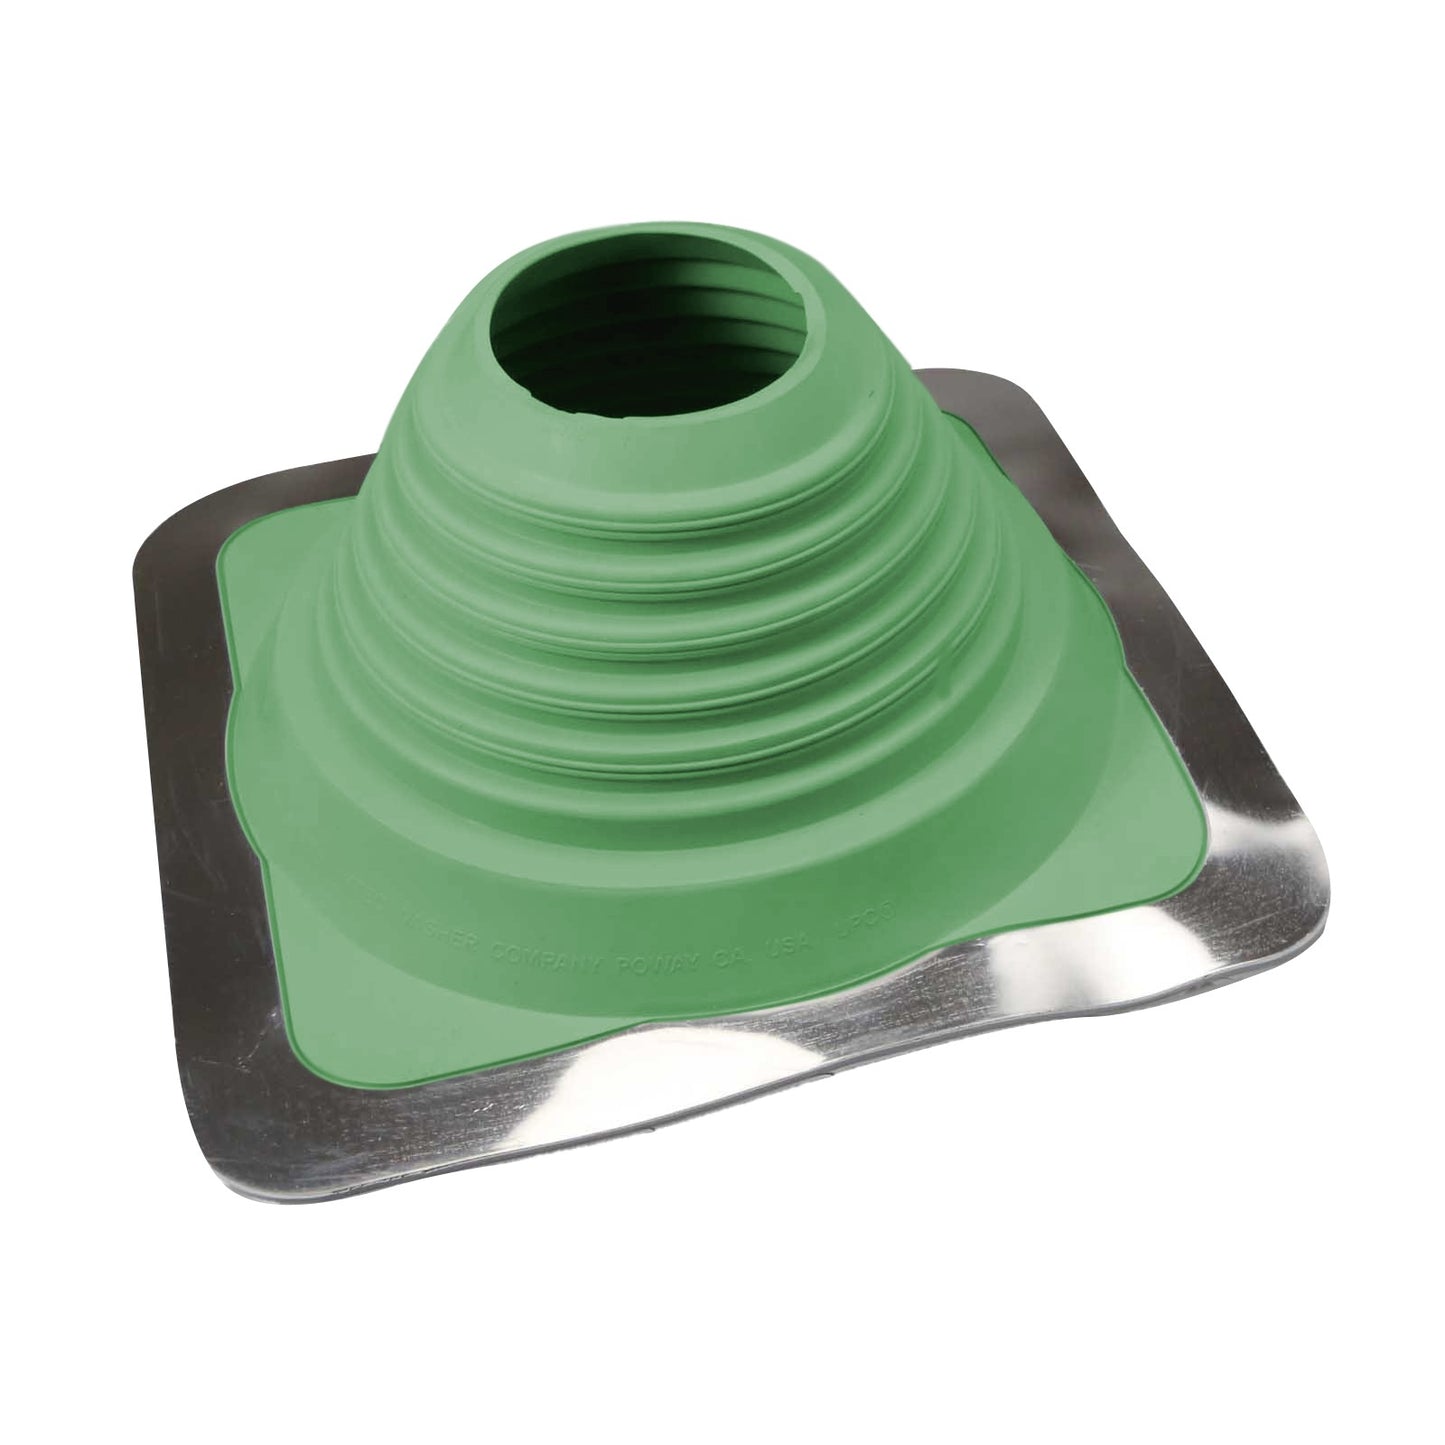 #5 Roofjack Square EPDM Pipe Flashing Boot Light Green